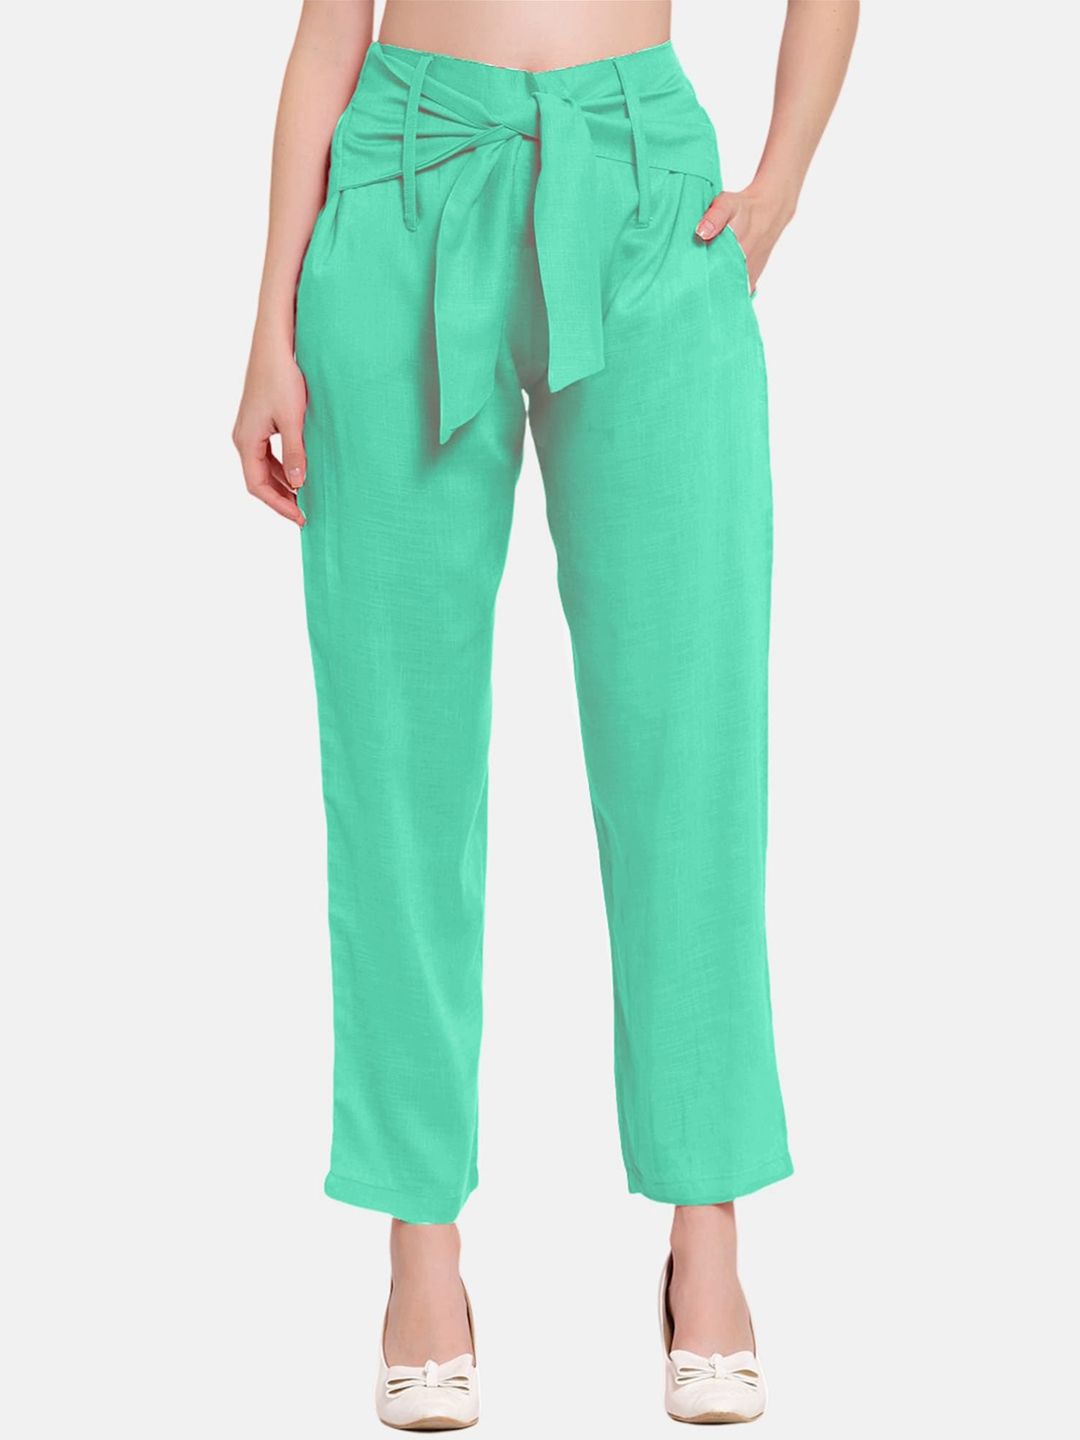 PATRORNA Women Smart Pleated Cotton Peg Trousers Price in India